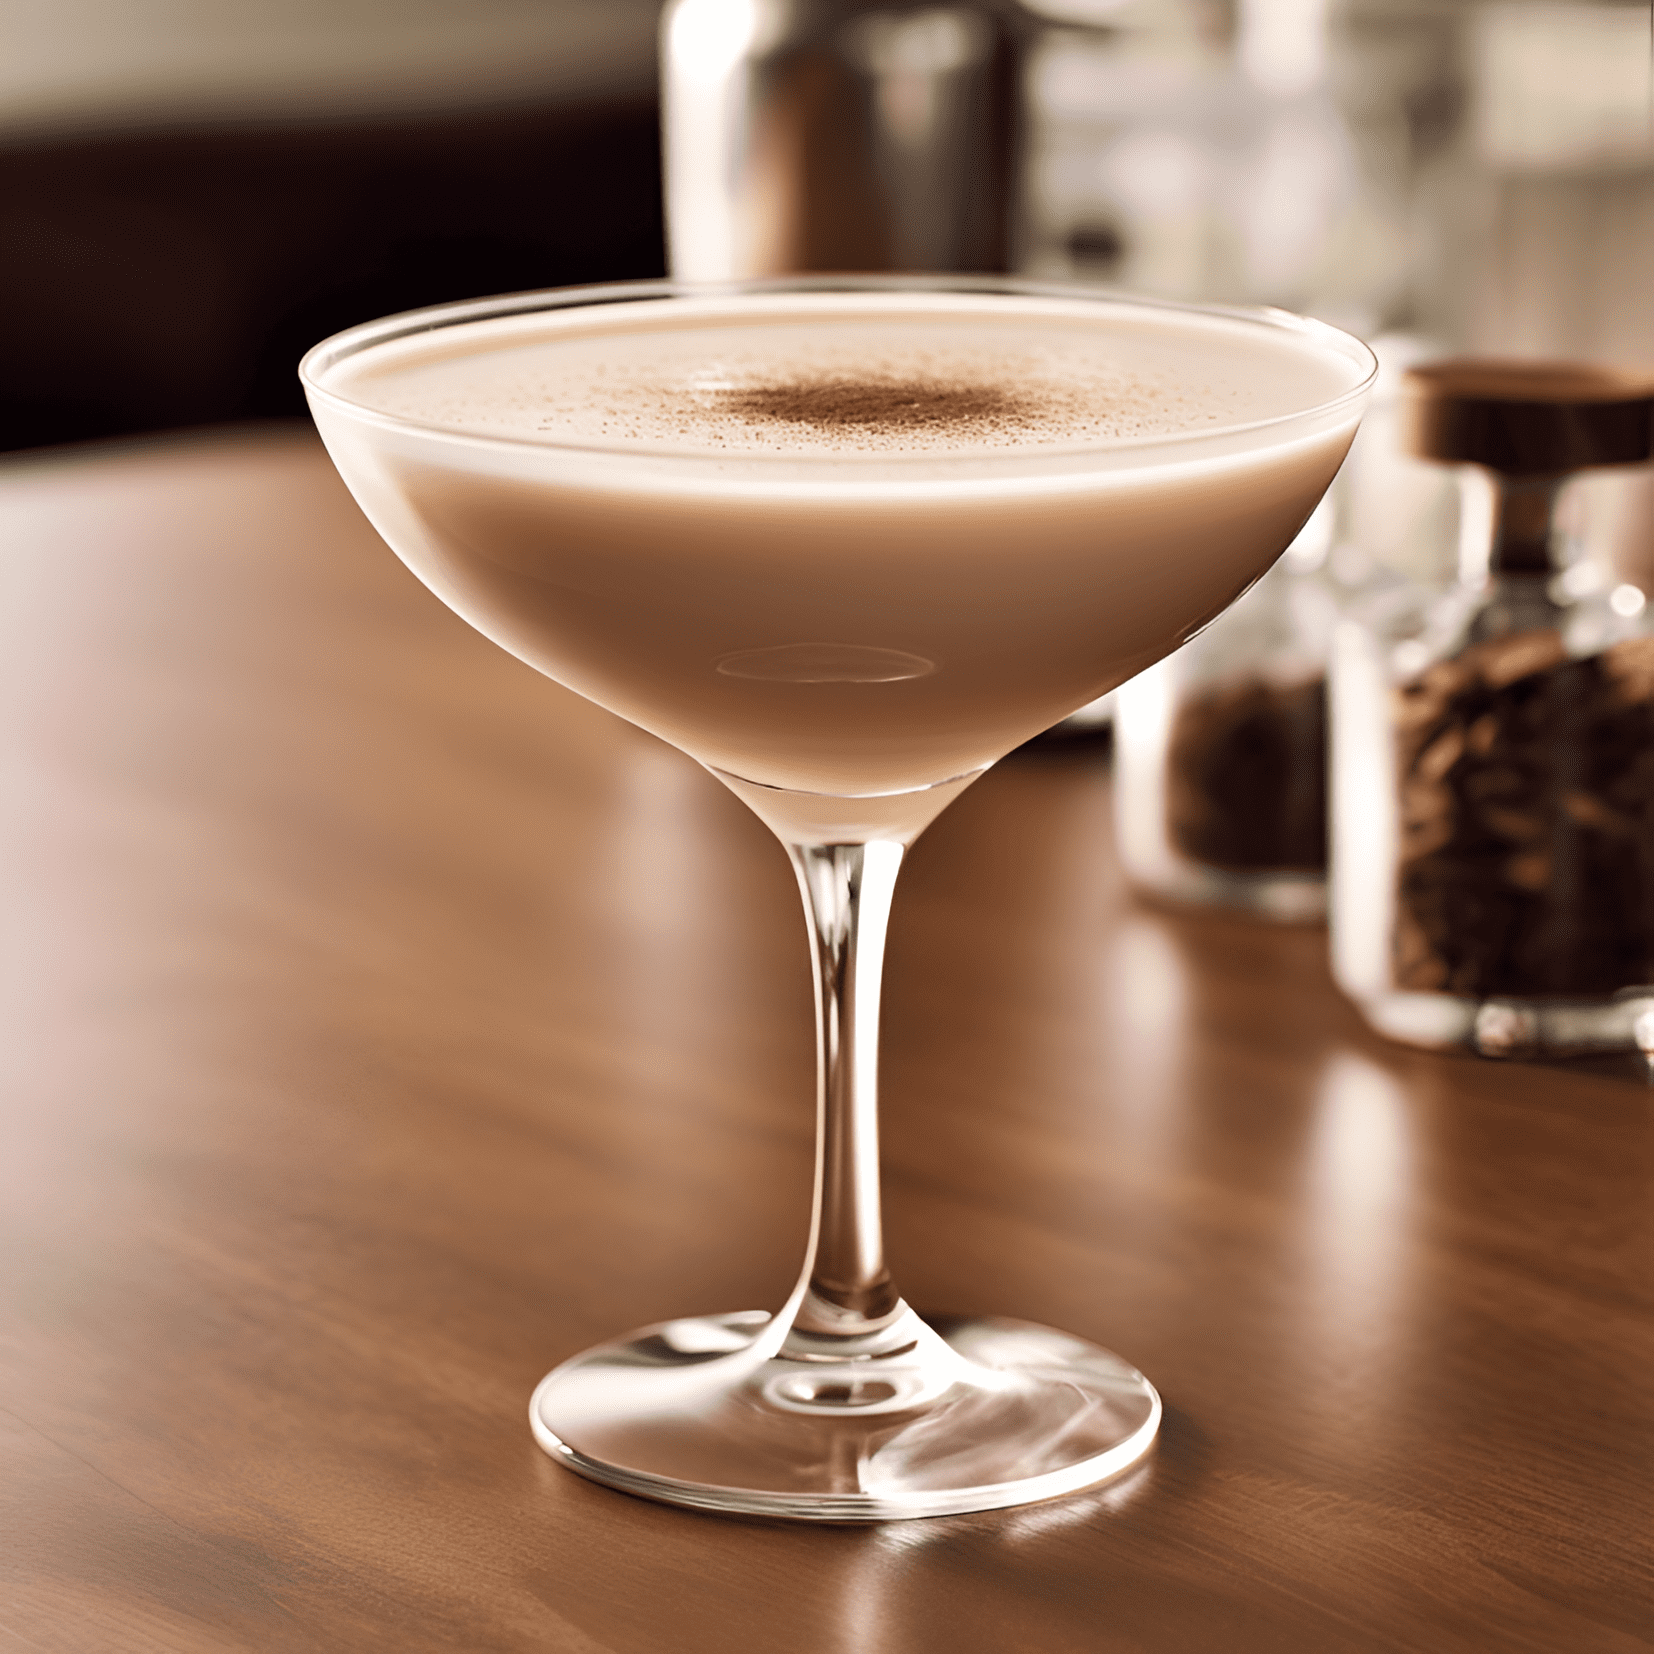 Brandy Alexander Cocktail Recipe - The Brandy Alexander is a rich, creamy, and sweet cocktail with a hint of nuttiness from the crème de cacao. It has a velvety texture and a warming, comforting taste that is perfect for sipping on a cold night.